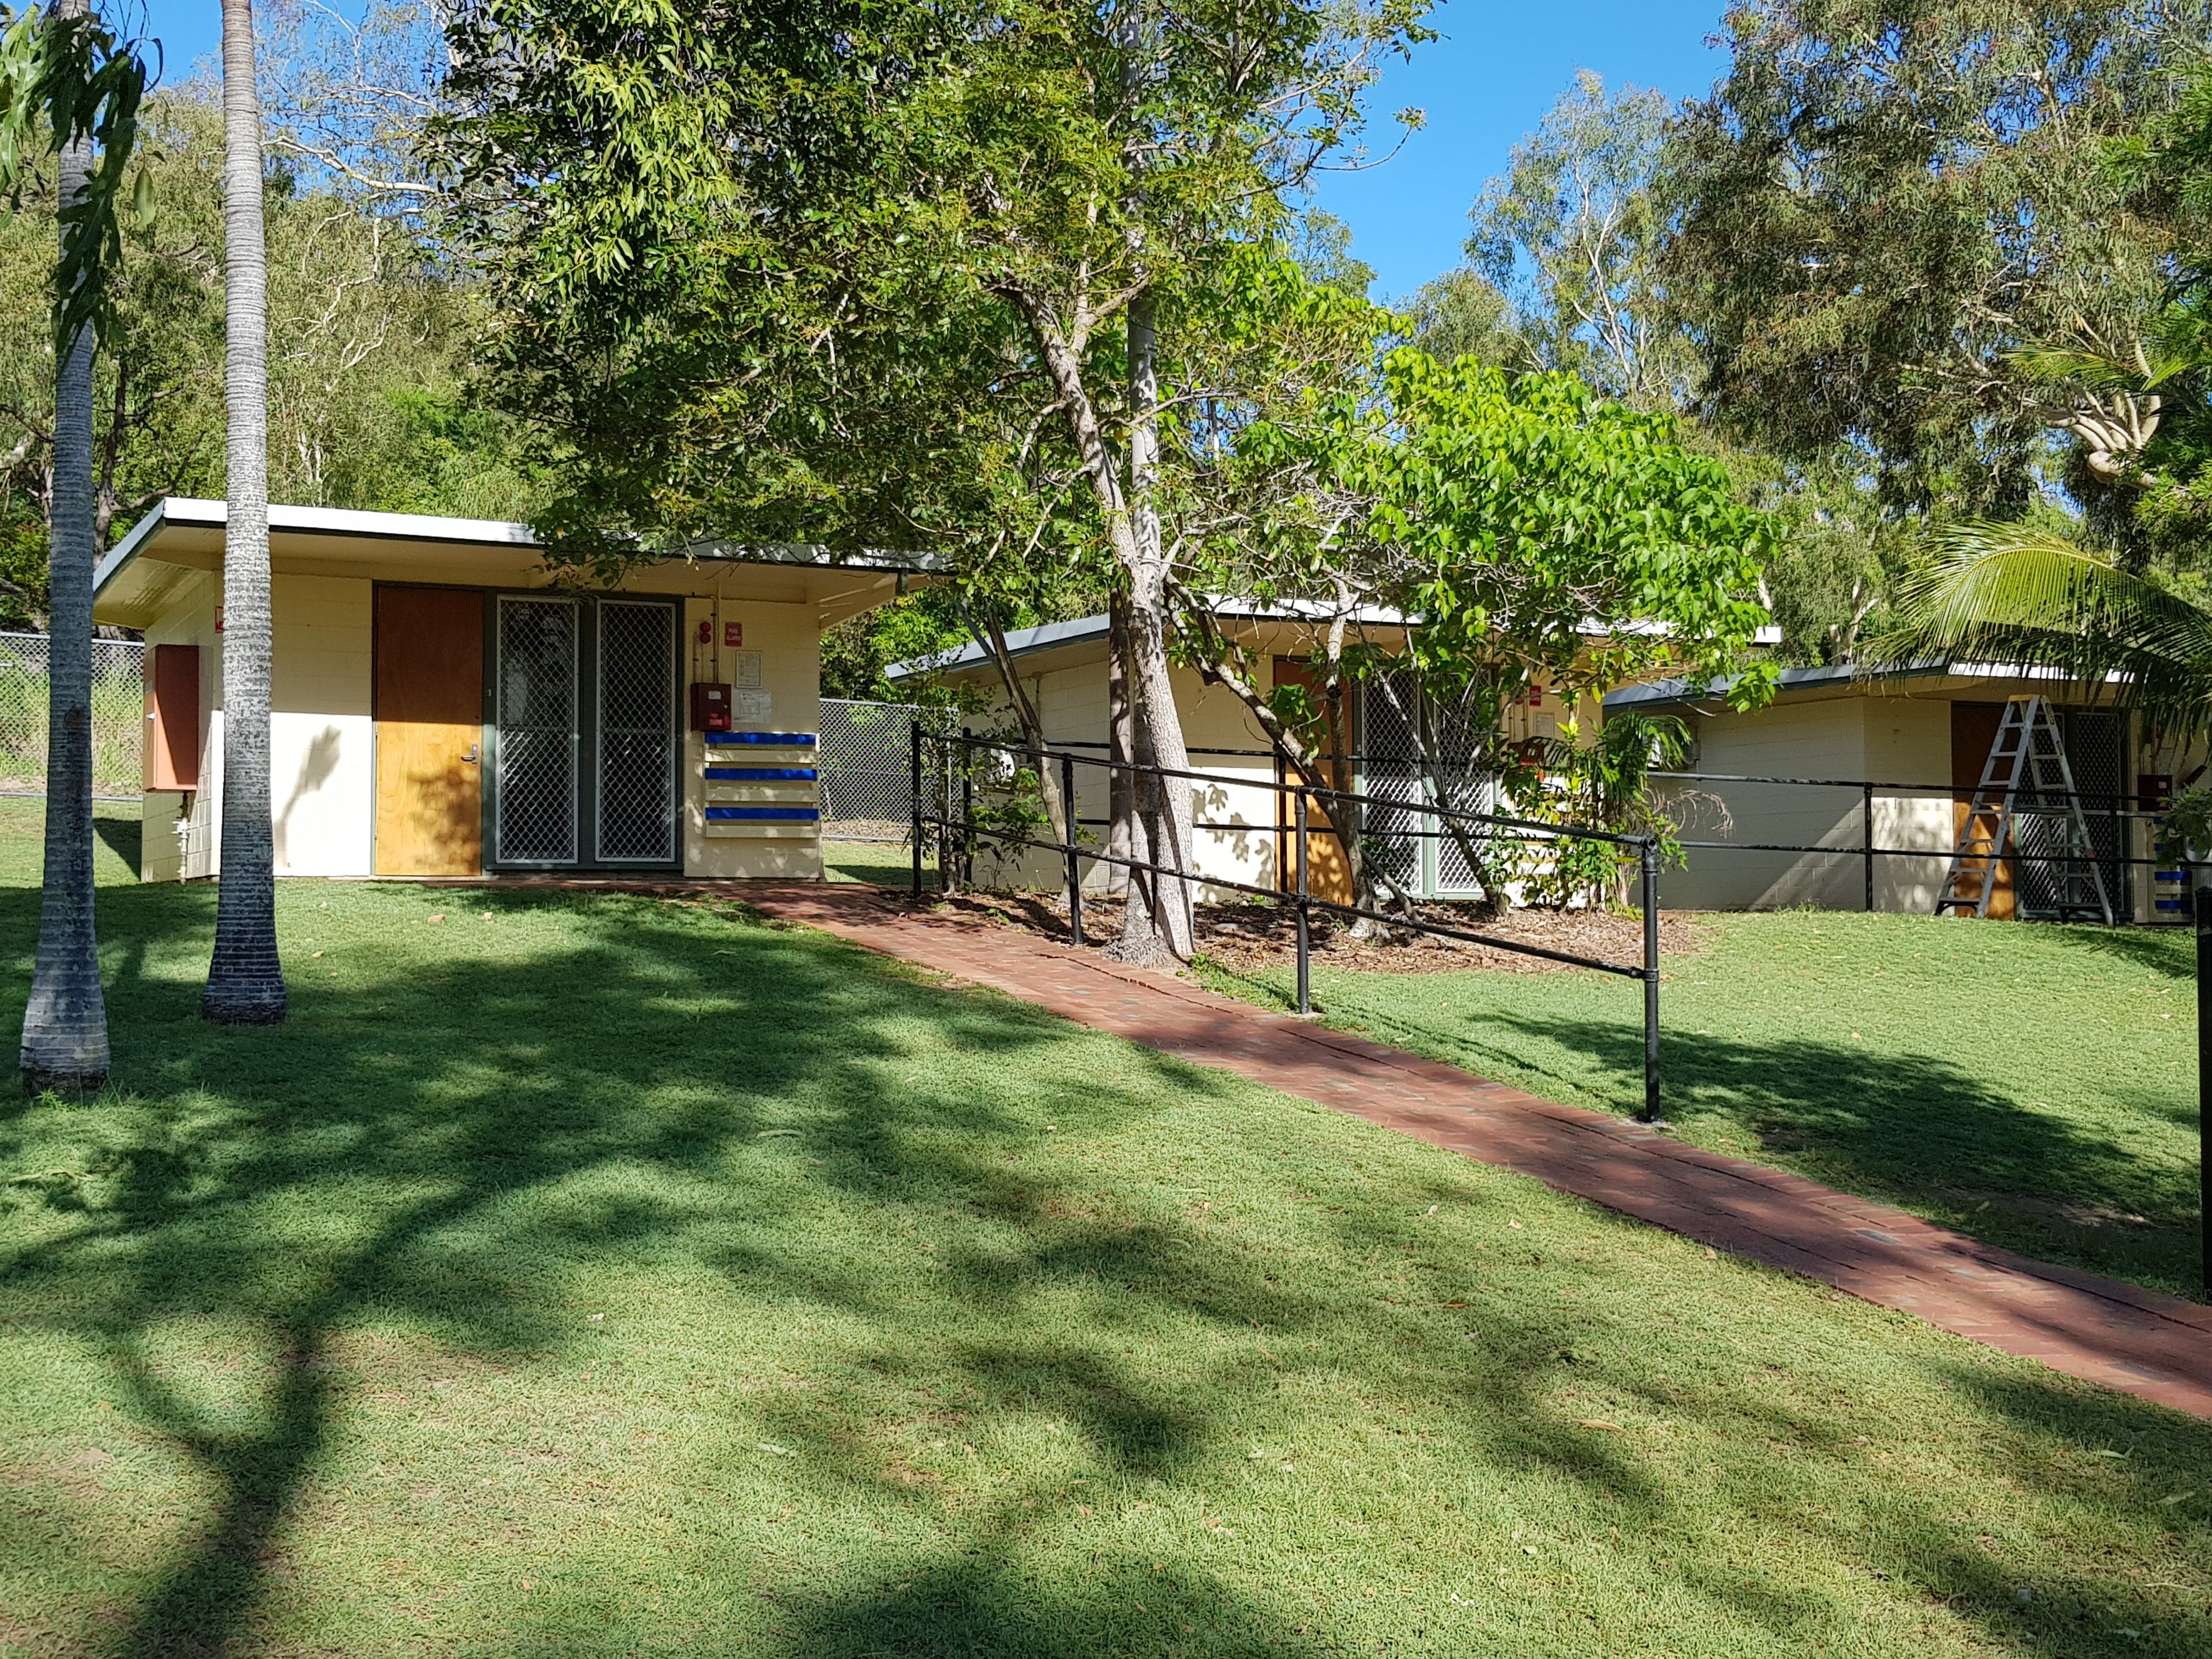 Apex Camps Magnetic Island Group Accommodation, Activities And Events - thumb 1